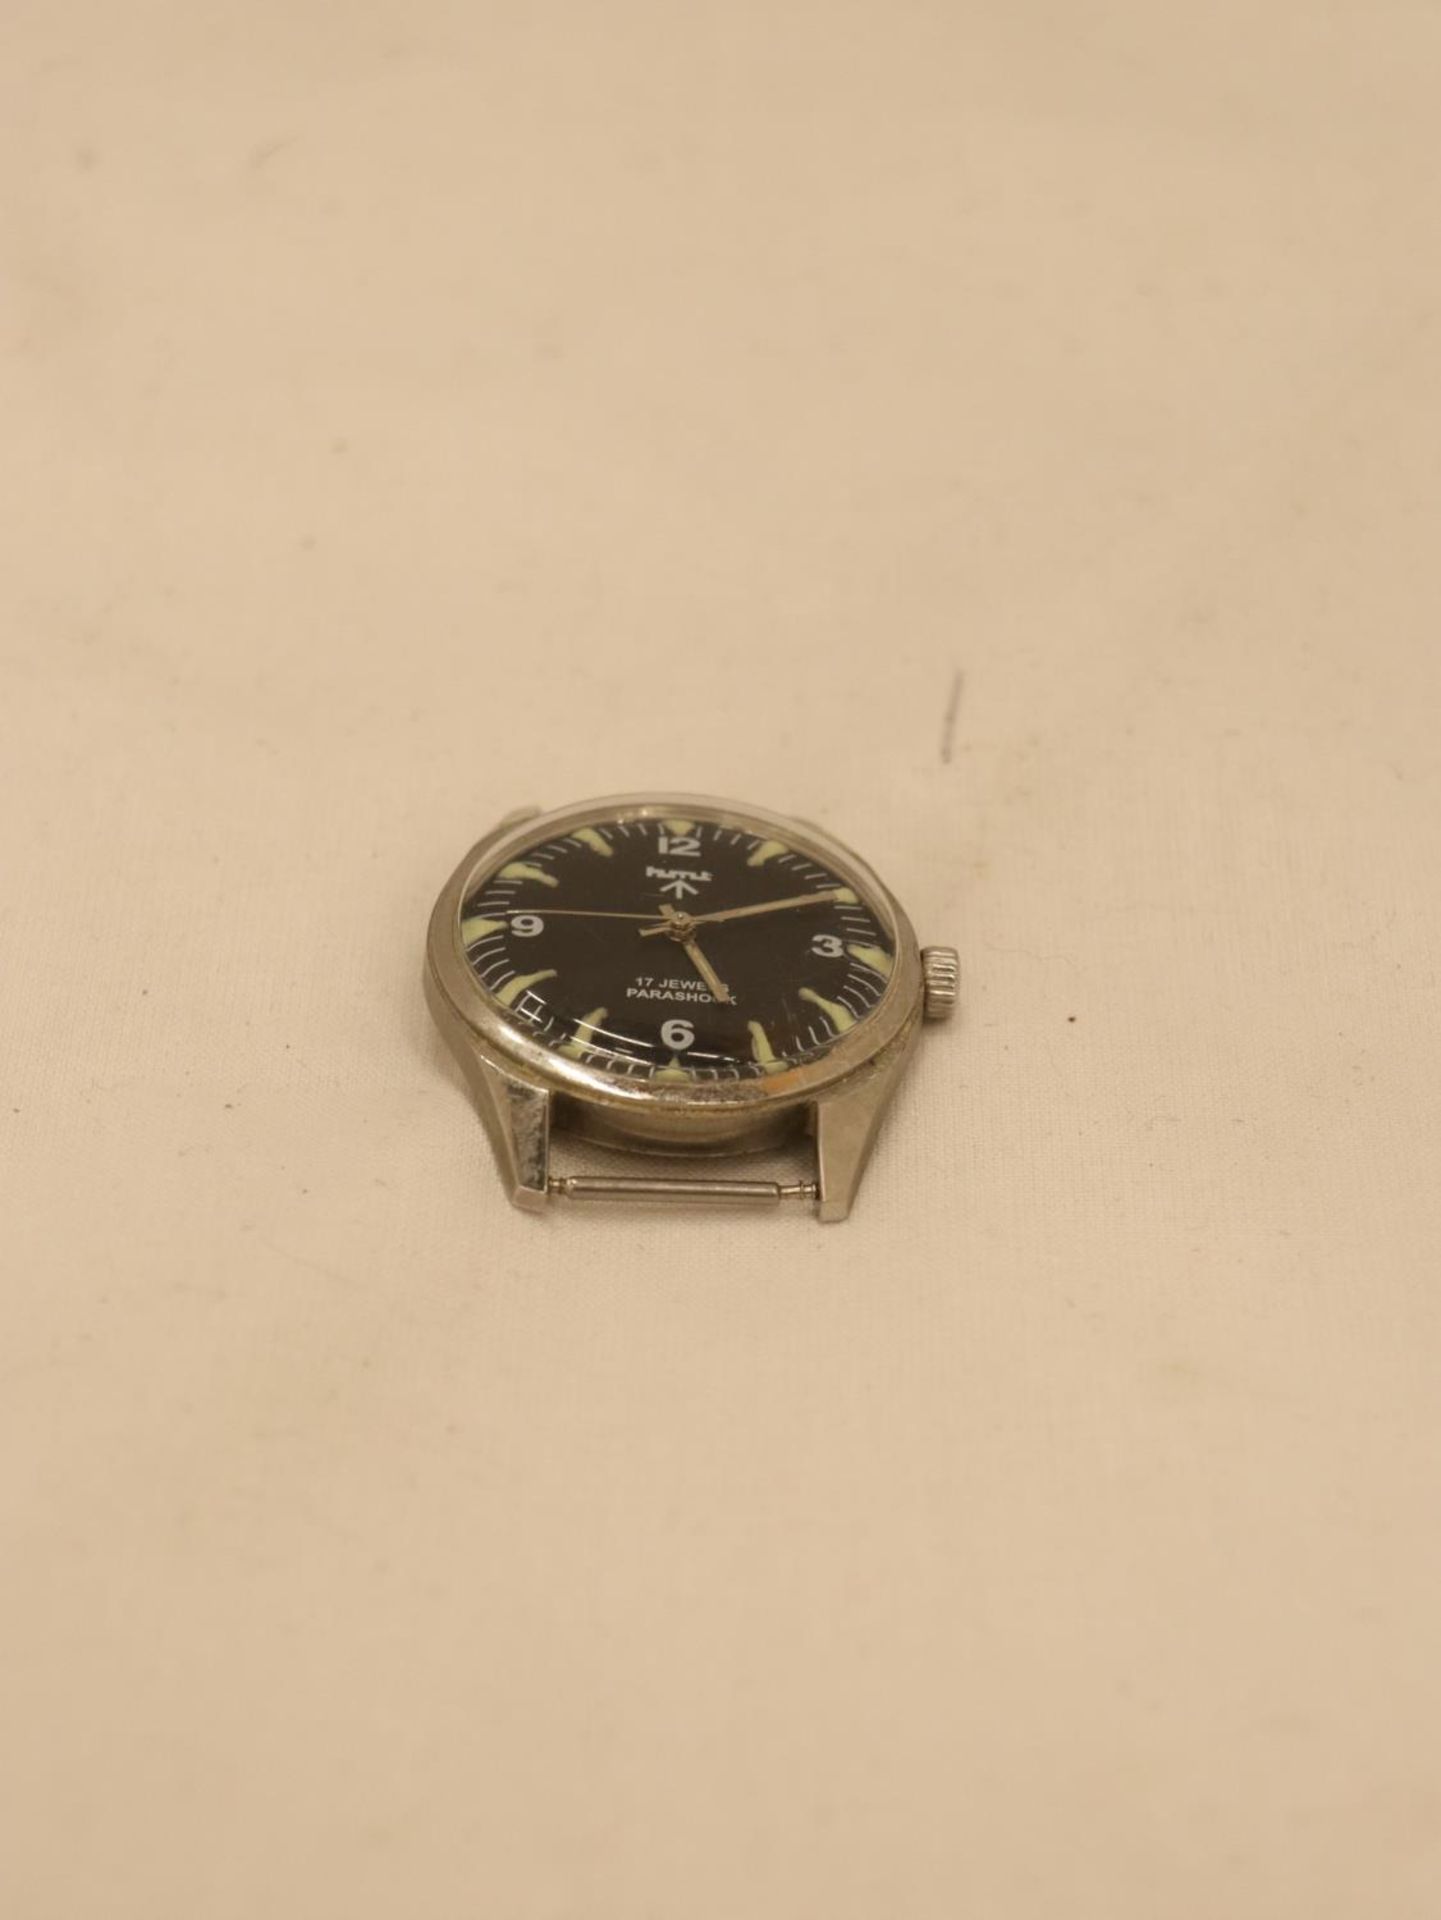 A VINTAGE HMT MILITARY WATCH - Image 2 of 3